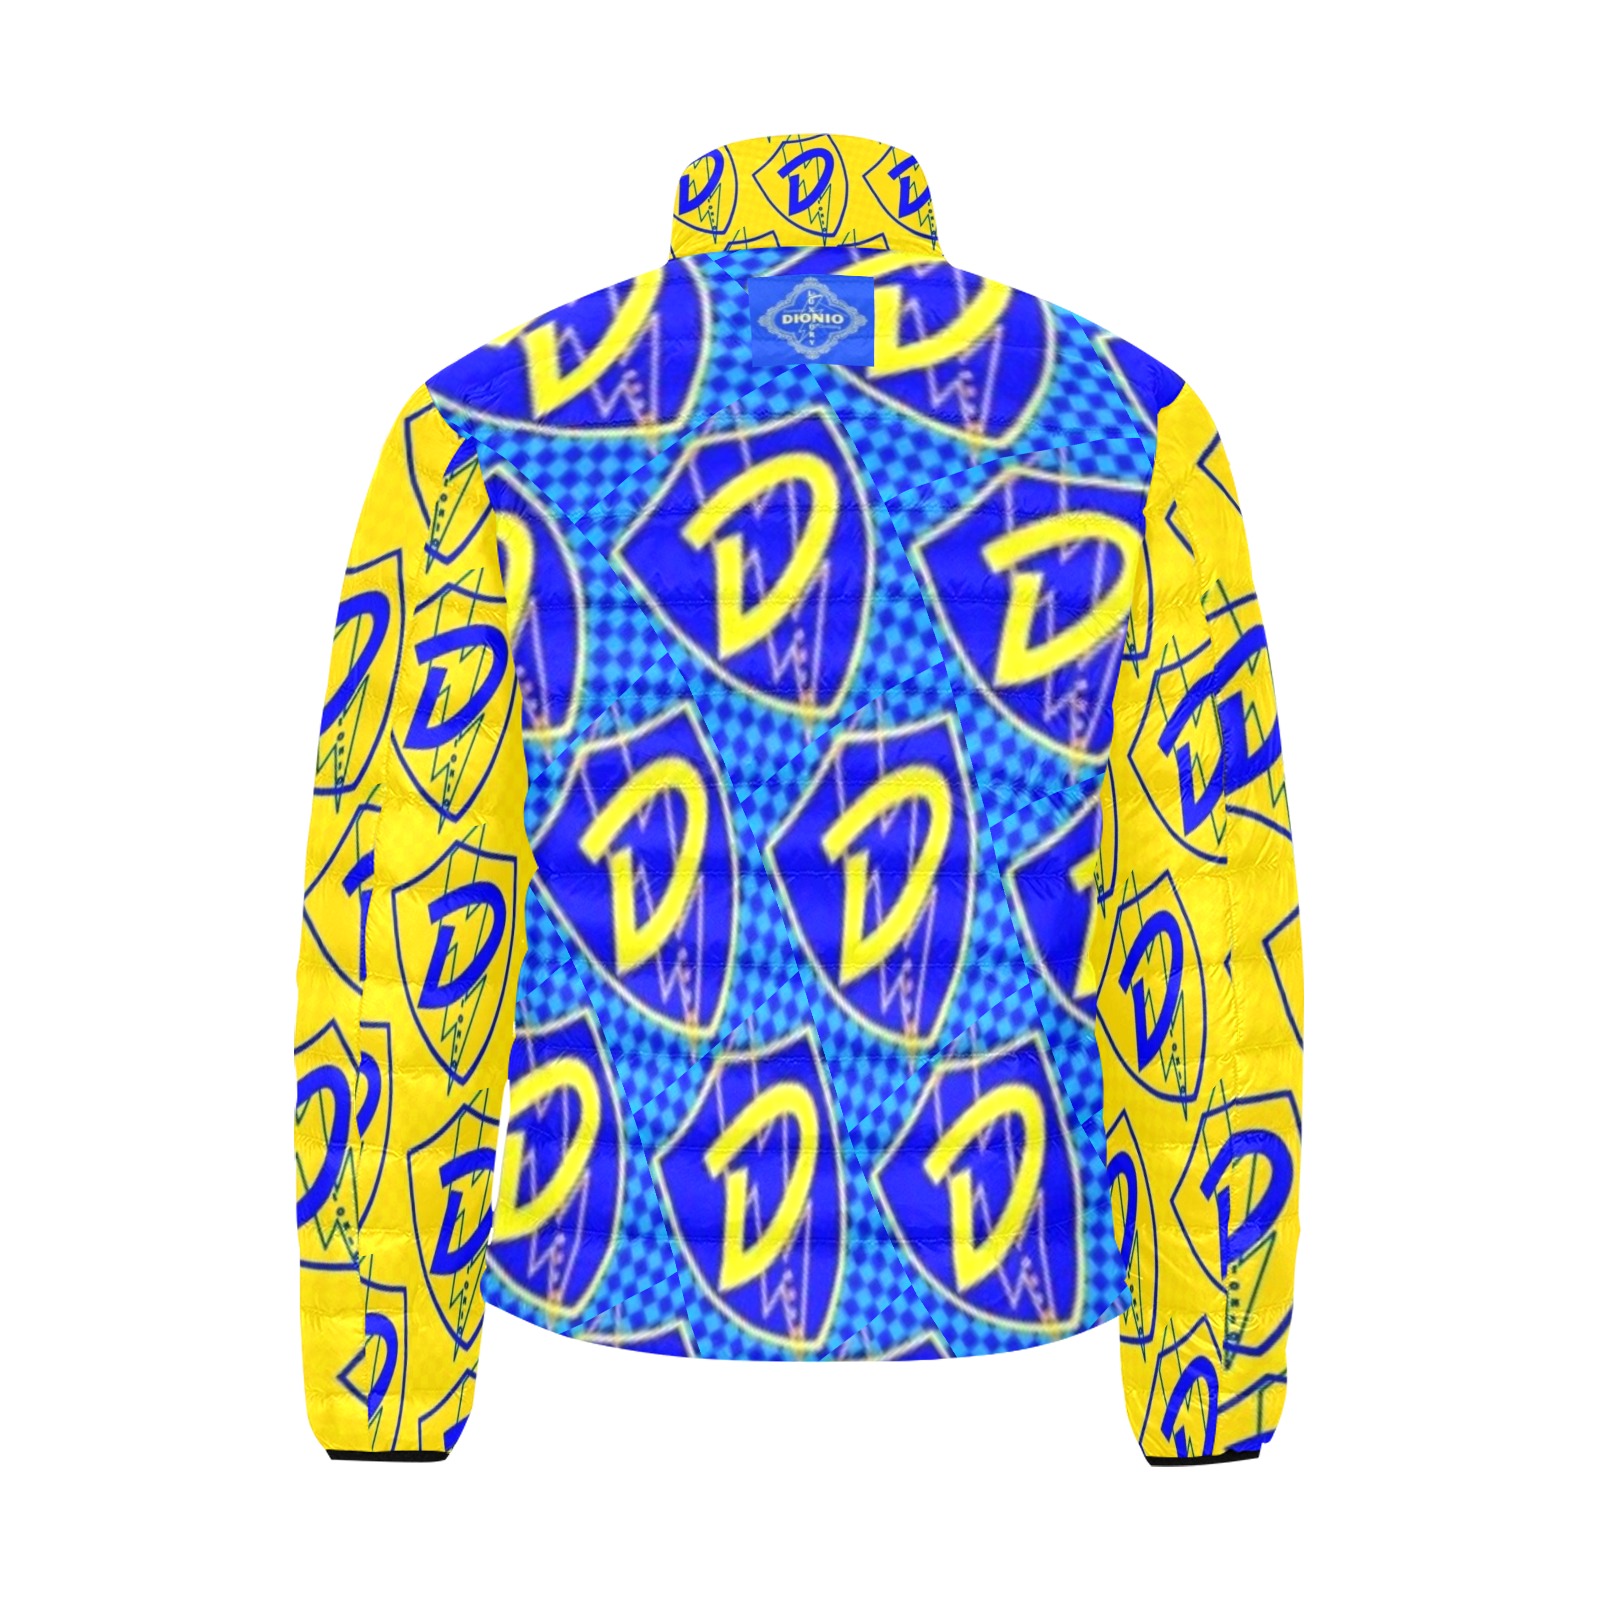 DIONIO Clothing - Blue & Yellow Shield Collab Padded Jacket (Blue Shield Logo Padded Jacket) Men's Stand Collar Padded Jacket (Model H41)